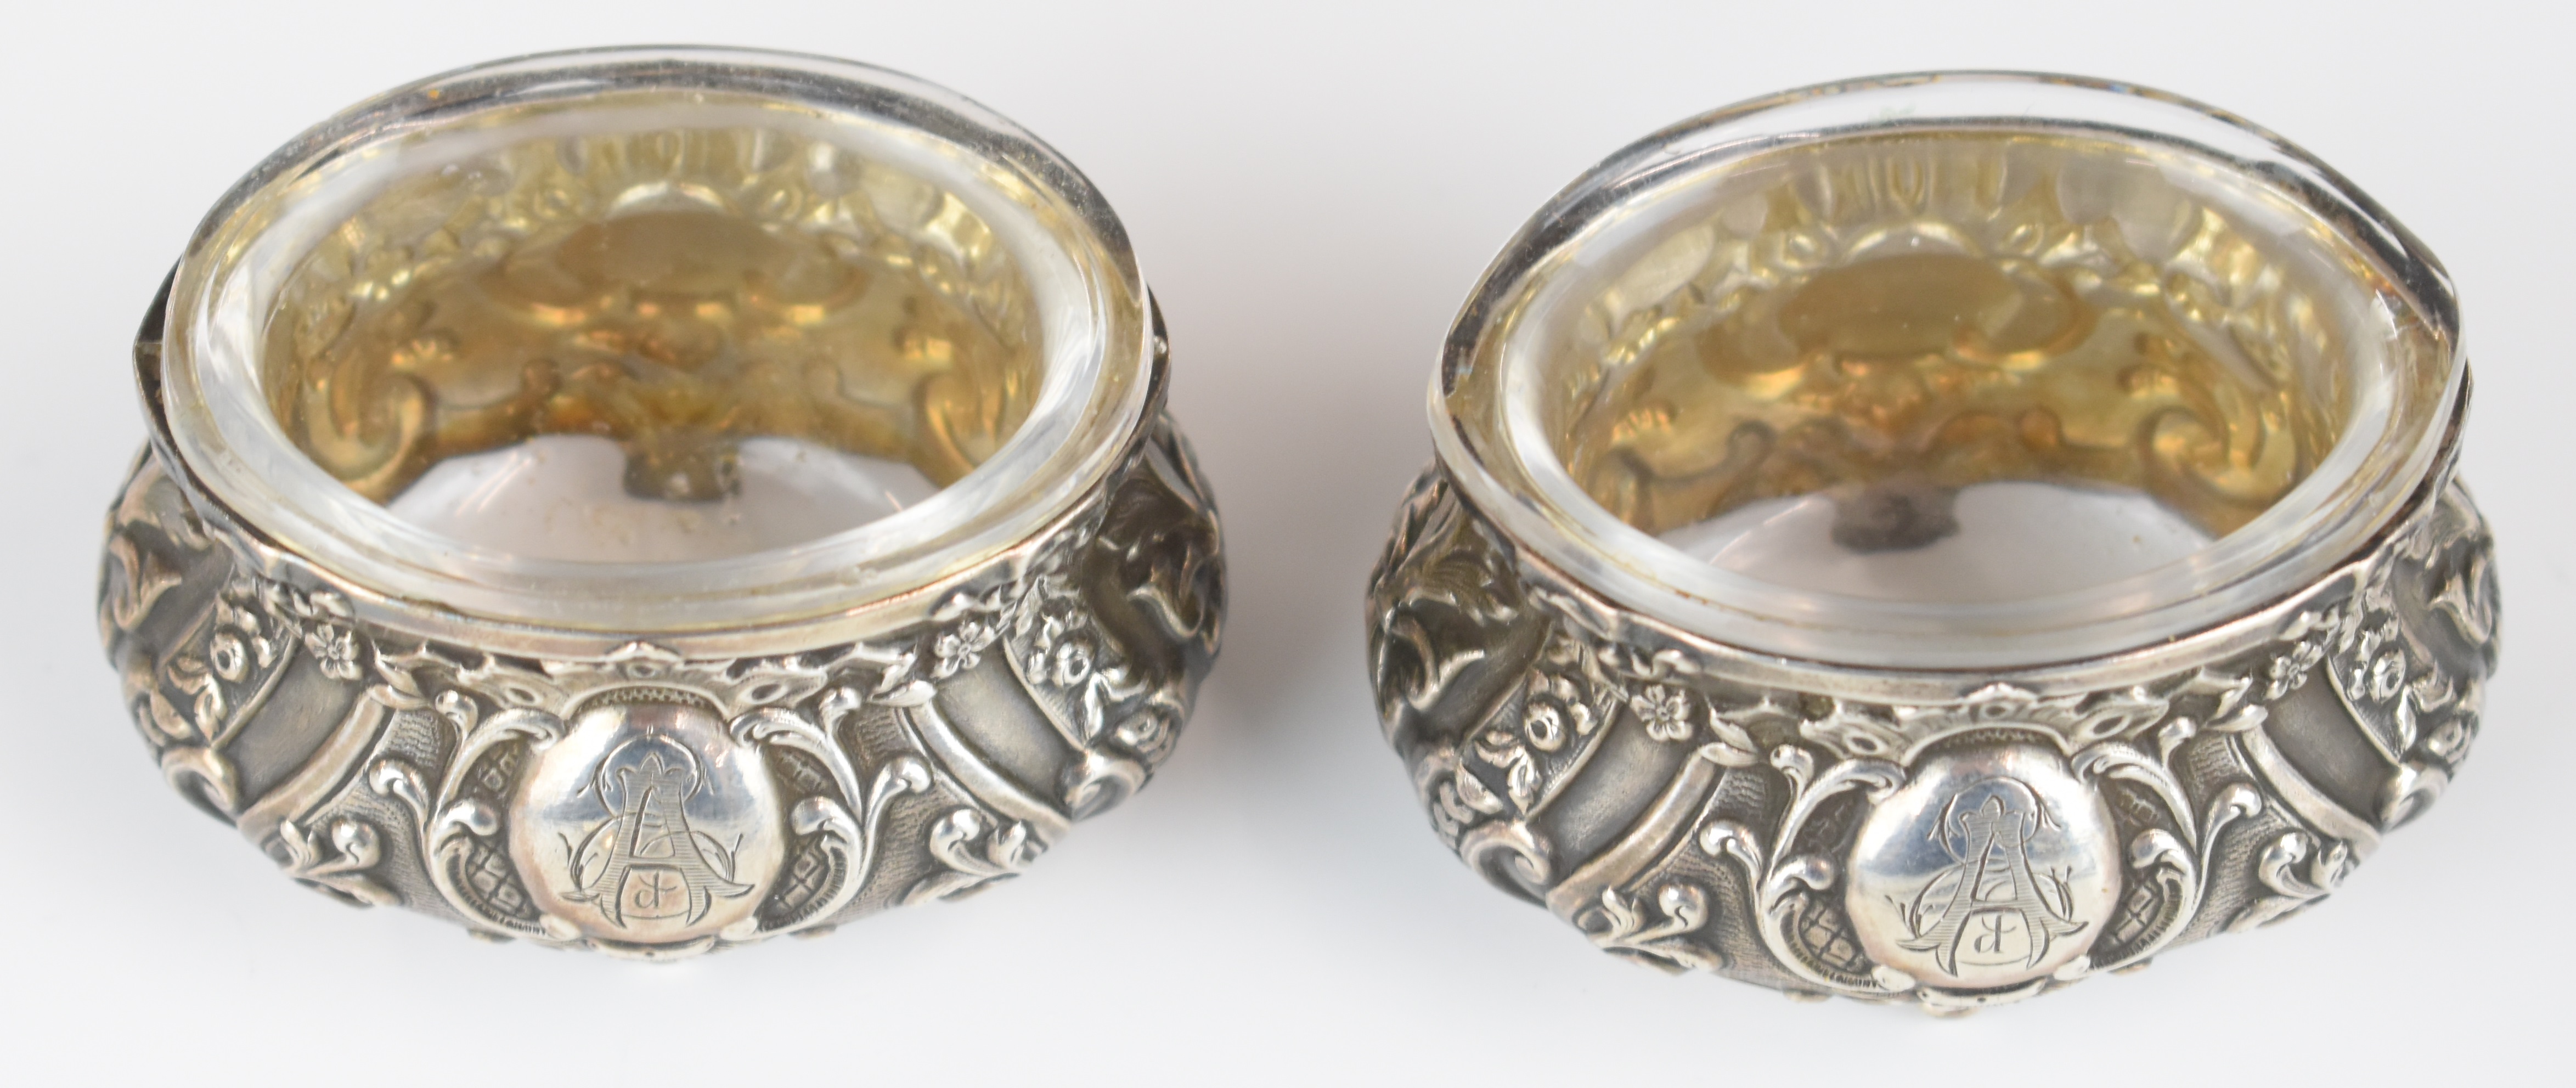 Pair of continental silver salts with clear glass liners, teaspoon marked sterling, further - Image 3 of 5